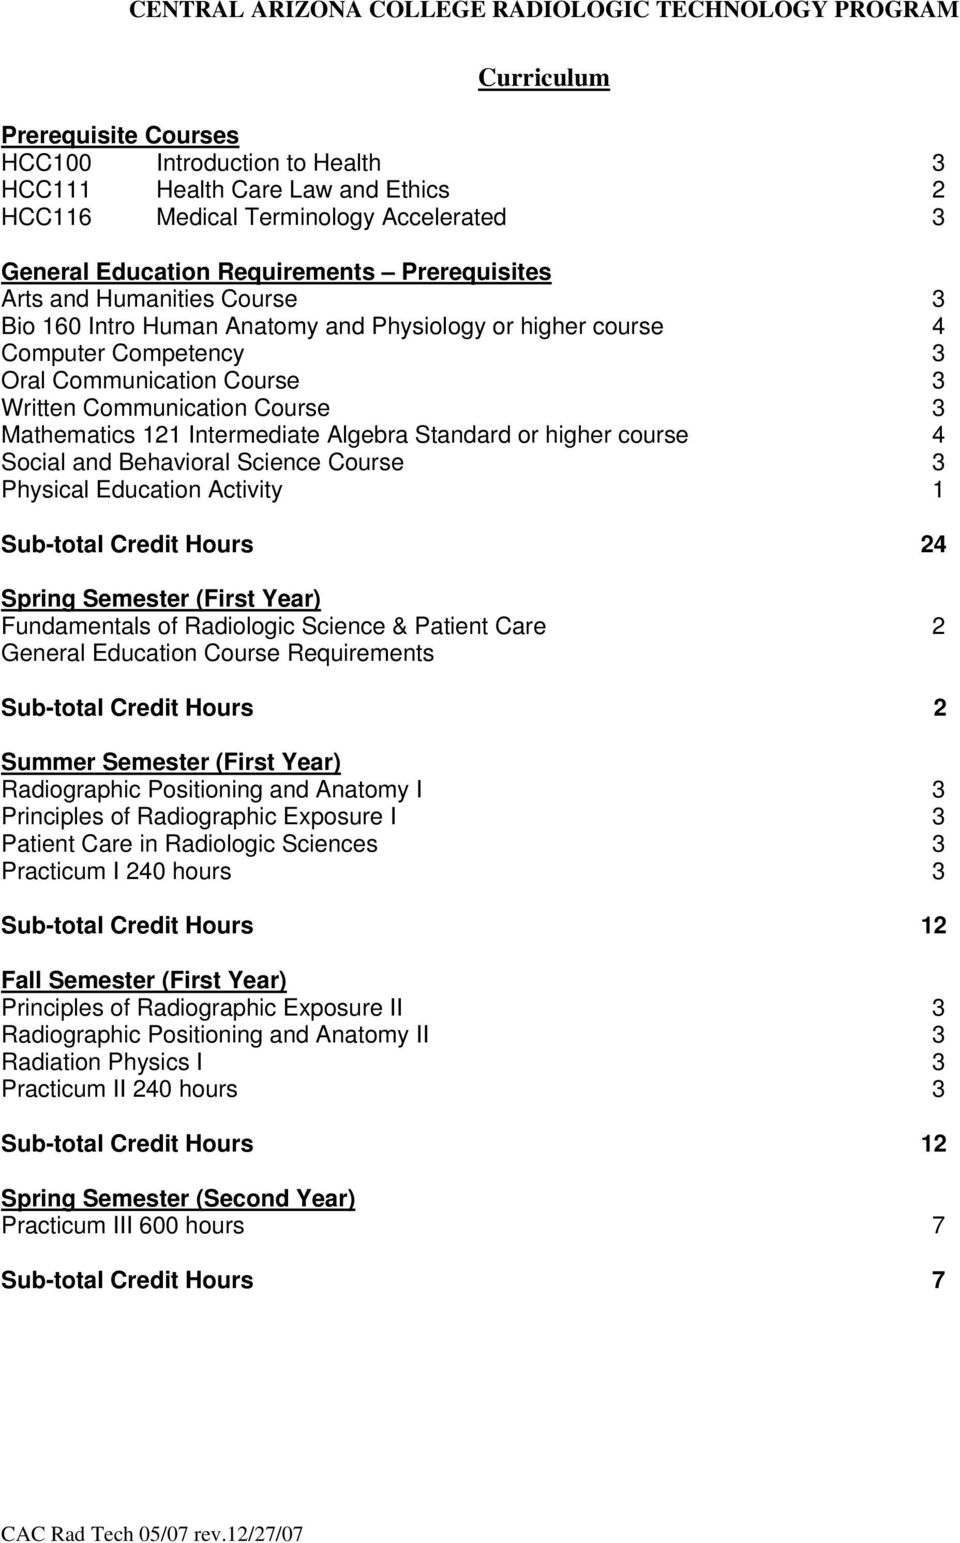 Standard or higher course 4 Social and Behavioral Science Course 3 Physical Education Activity 1 Sub-total Credit Hours 24 Spring Semester (First Year) Fundamentals of Radiologic Science & Patient